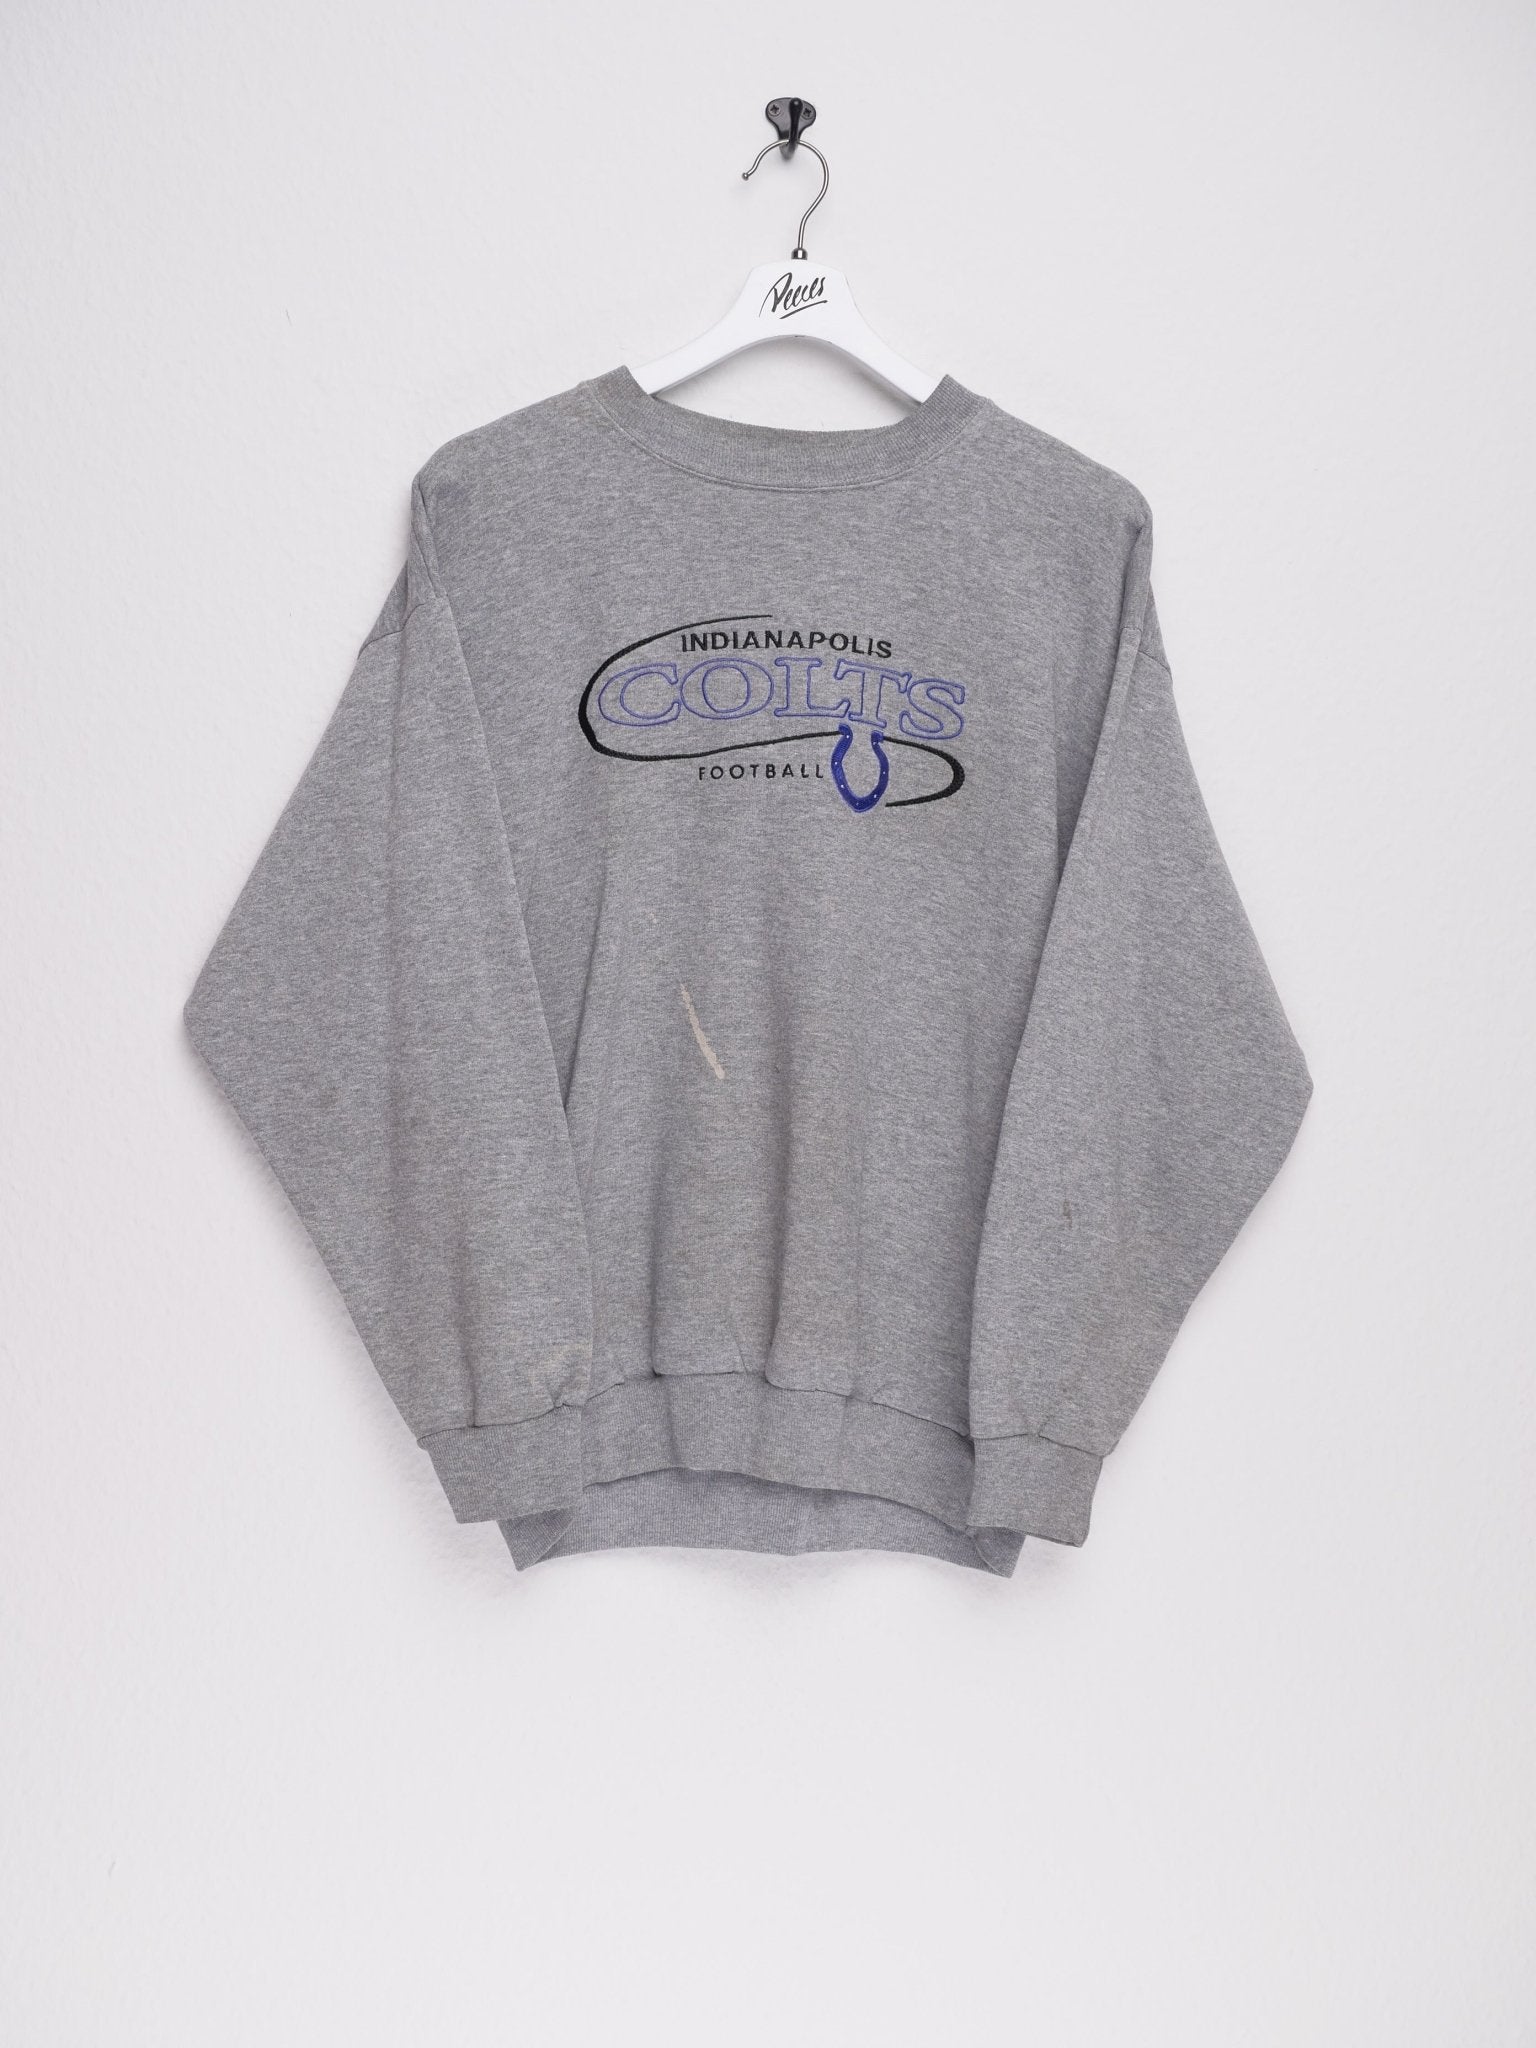 Indianapolis Colts embroidered Graphic grey Sweater - Peeces